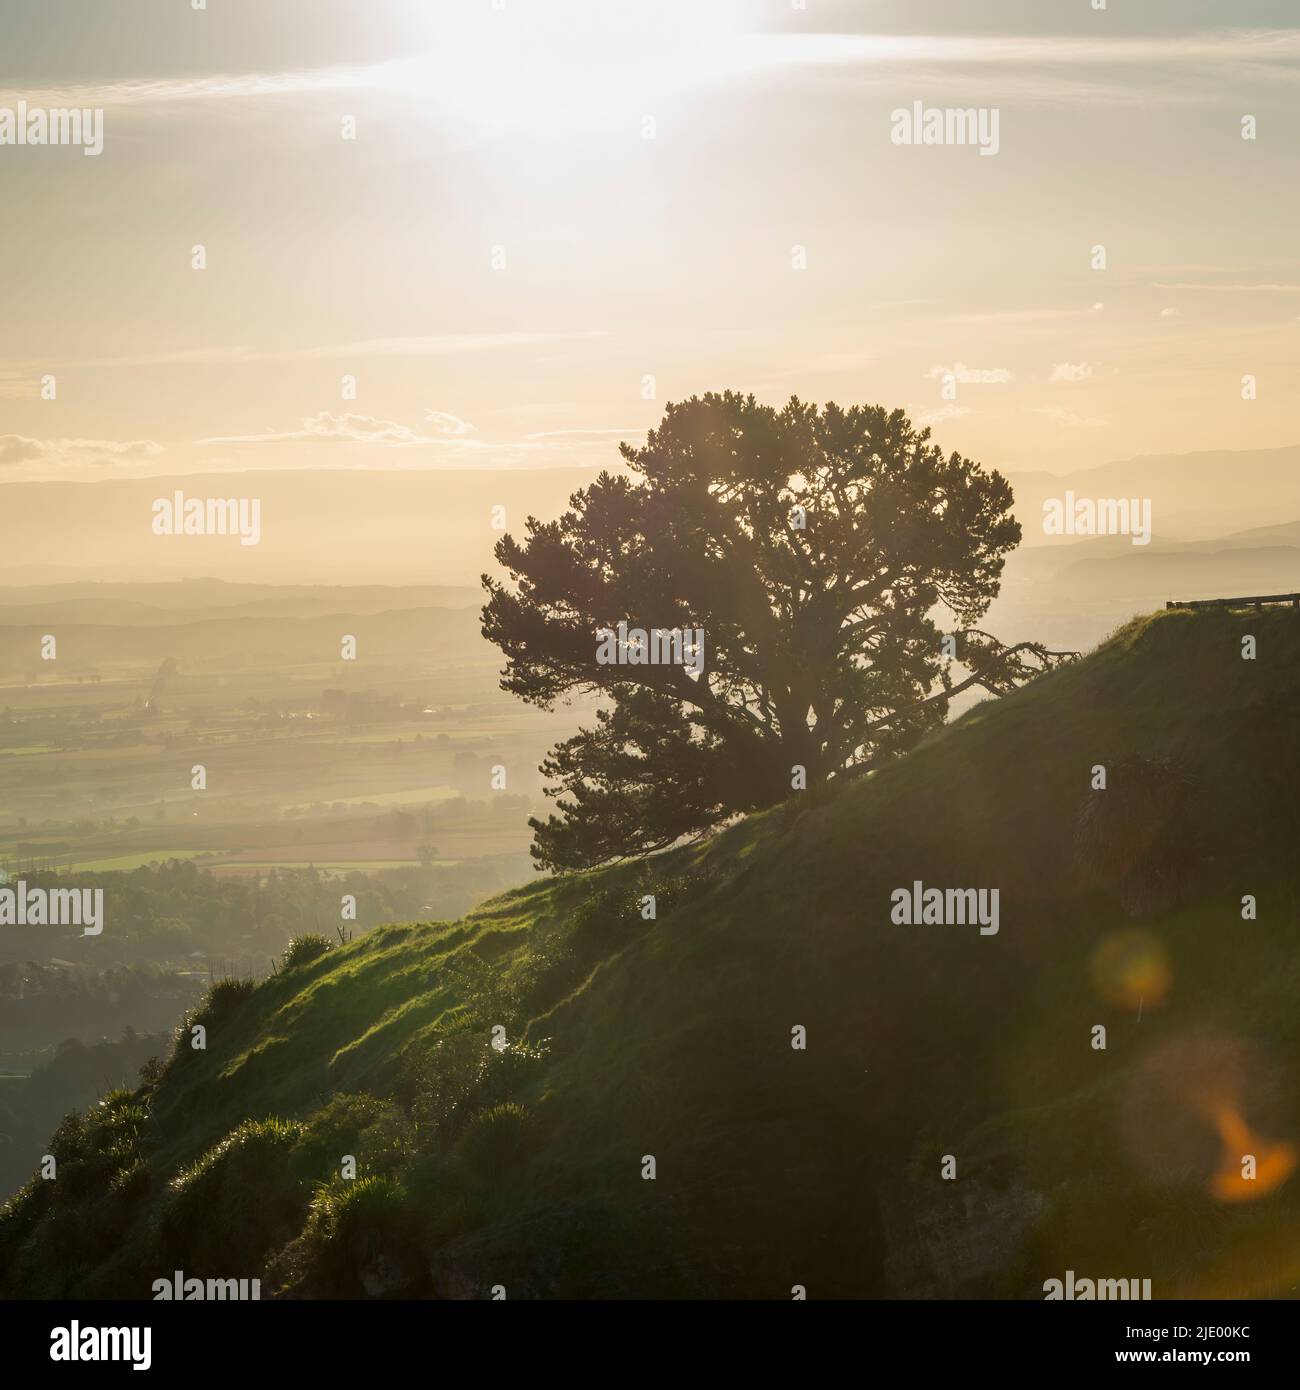 Big tree standing on the hill of Te Mata Peak at sunset, Hawke’s Bay. Vertical format. Stock Photo